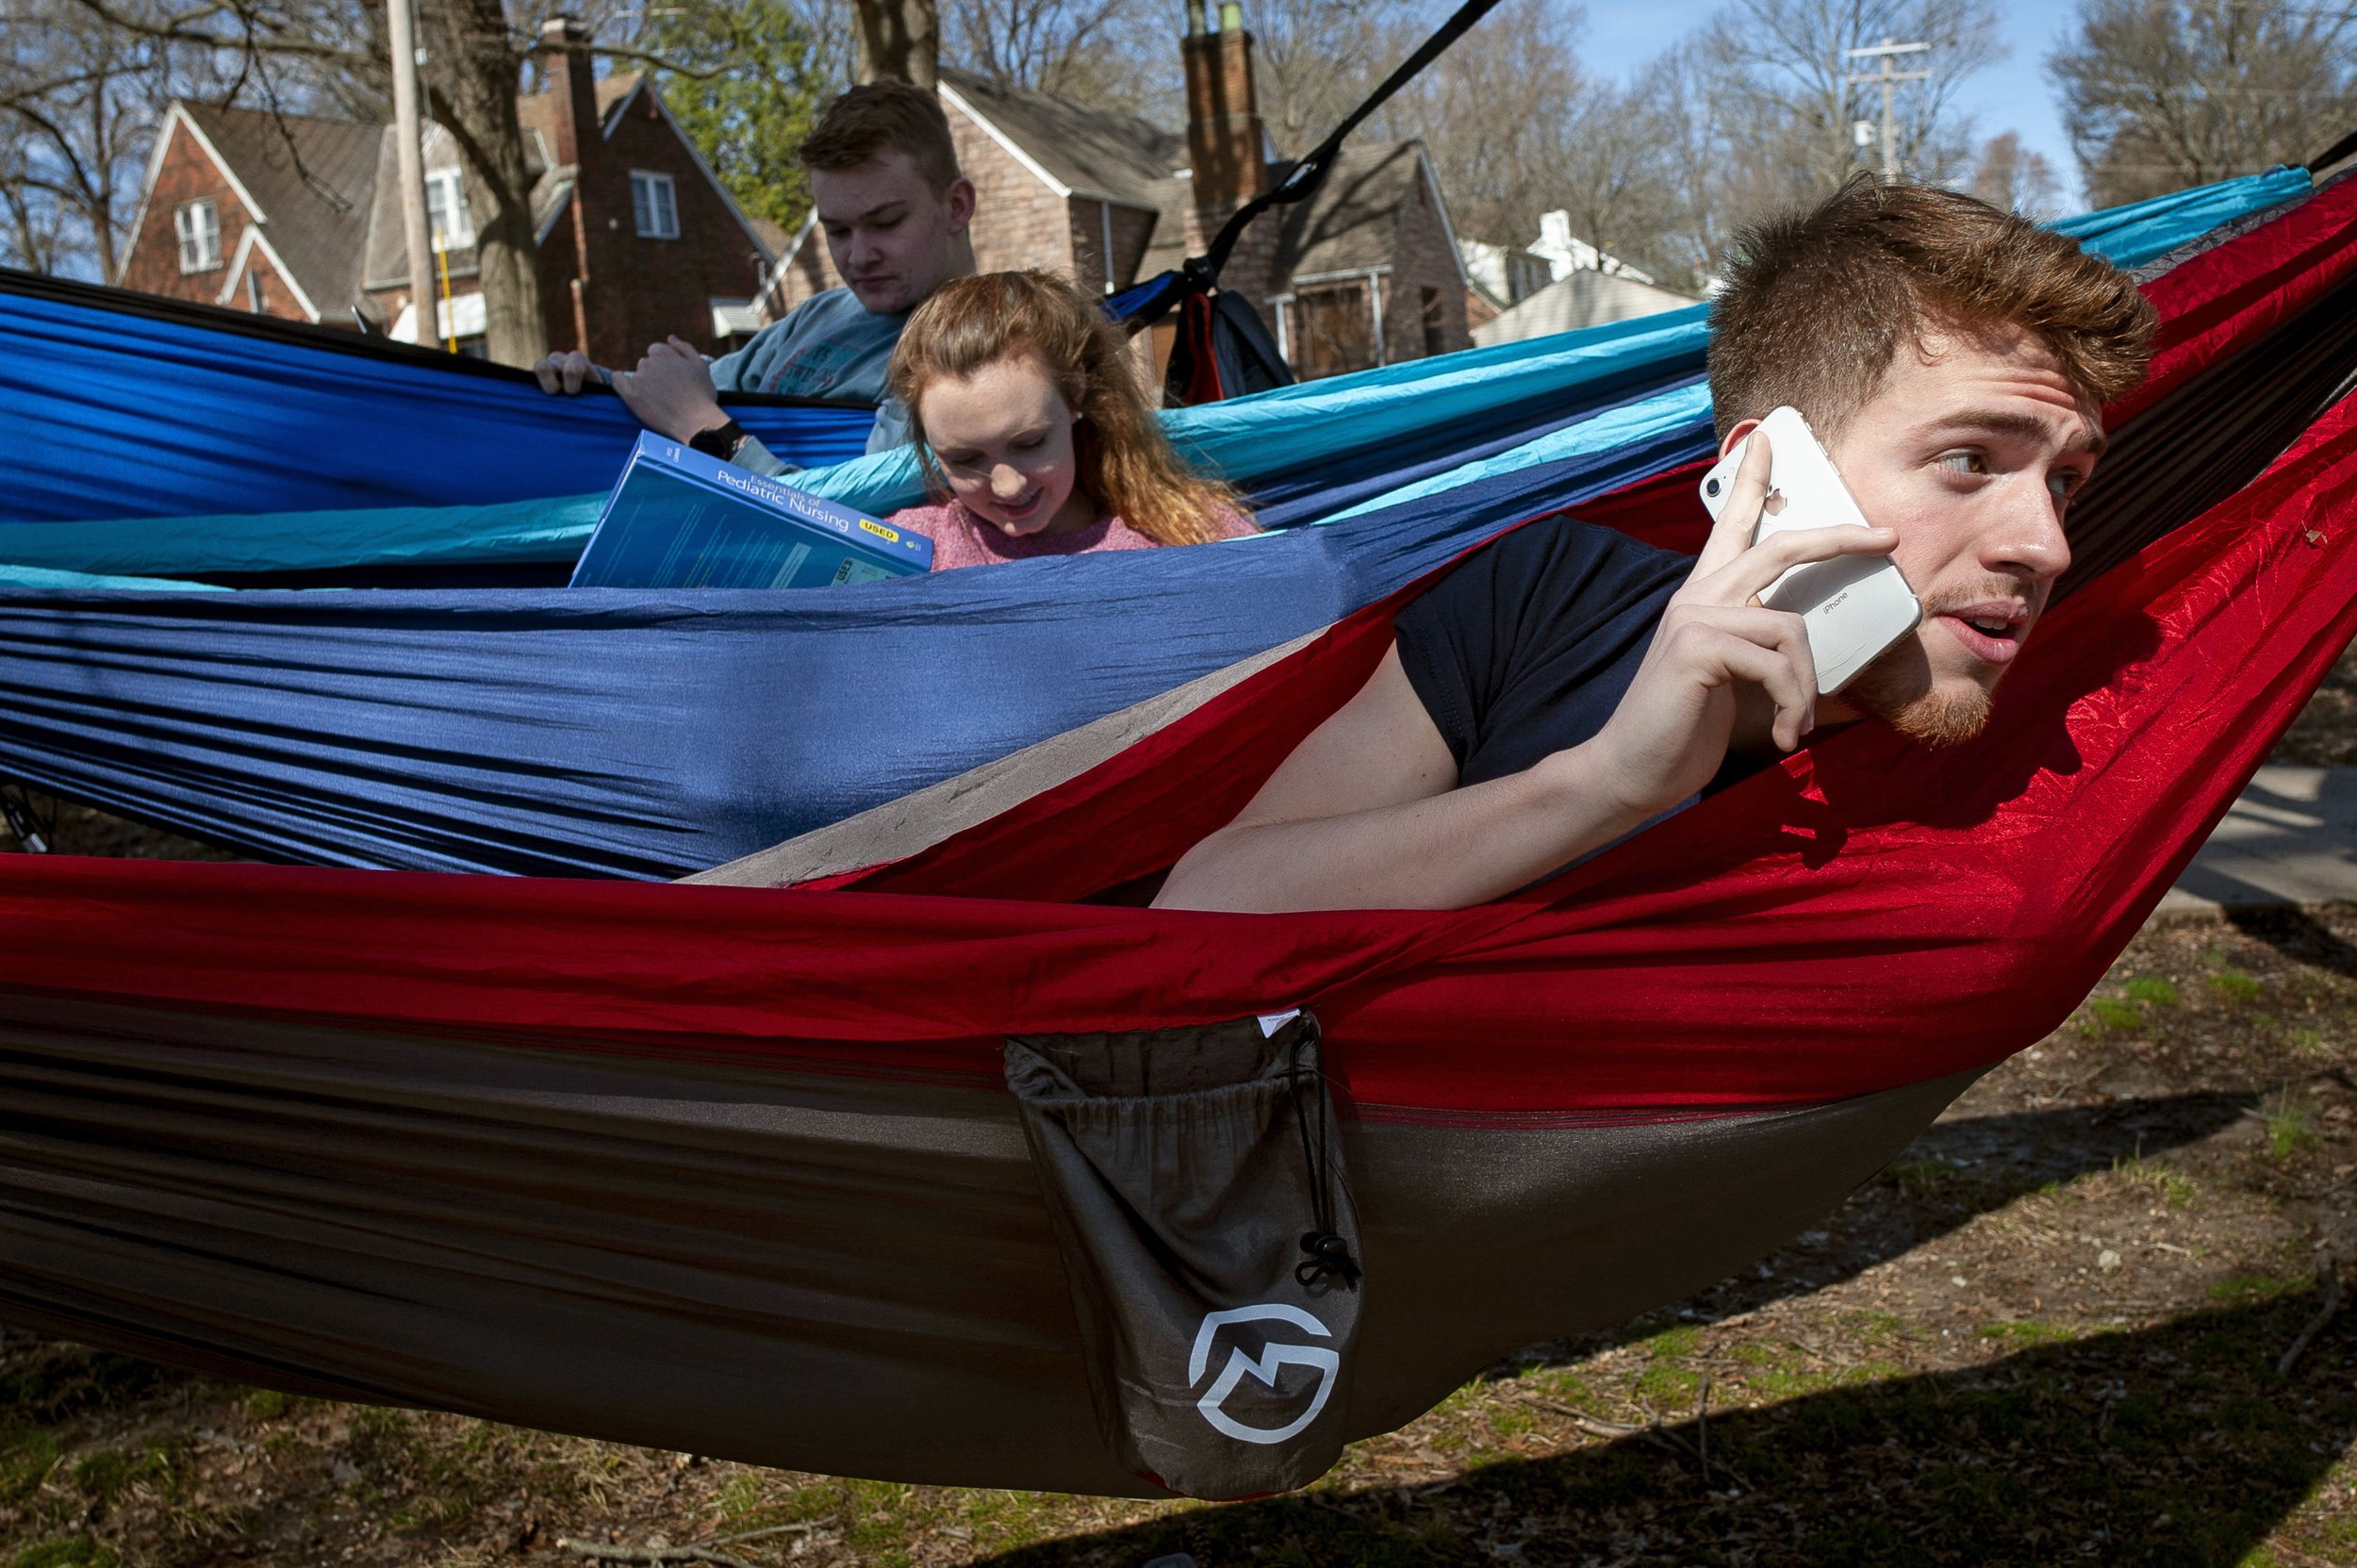  David Dugan of Charleston, Missouri, speaks on the phone with Ashley Freese of St. Louis, Missouri, who was about the join the hammocking group of Southeast Missouri State University students including Harley Allen of Dexter, Missouri, (middle) and 